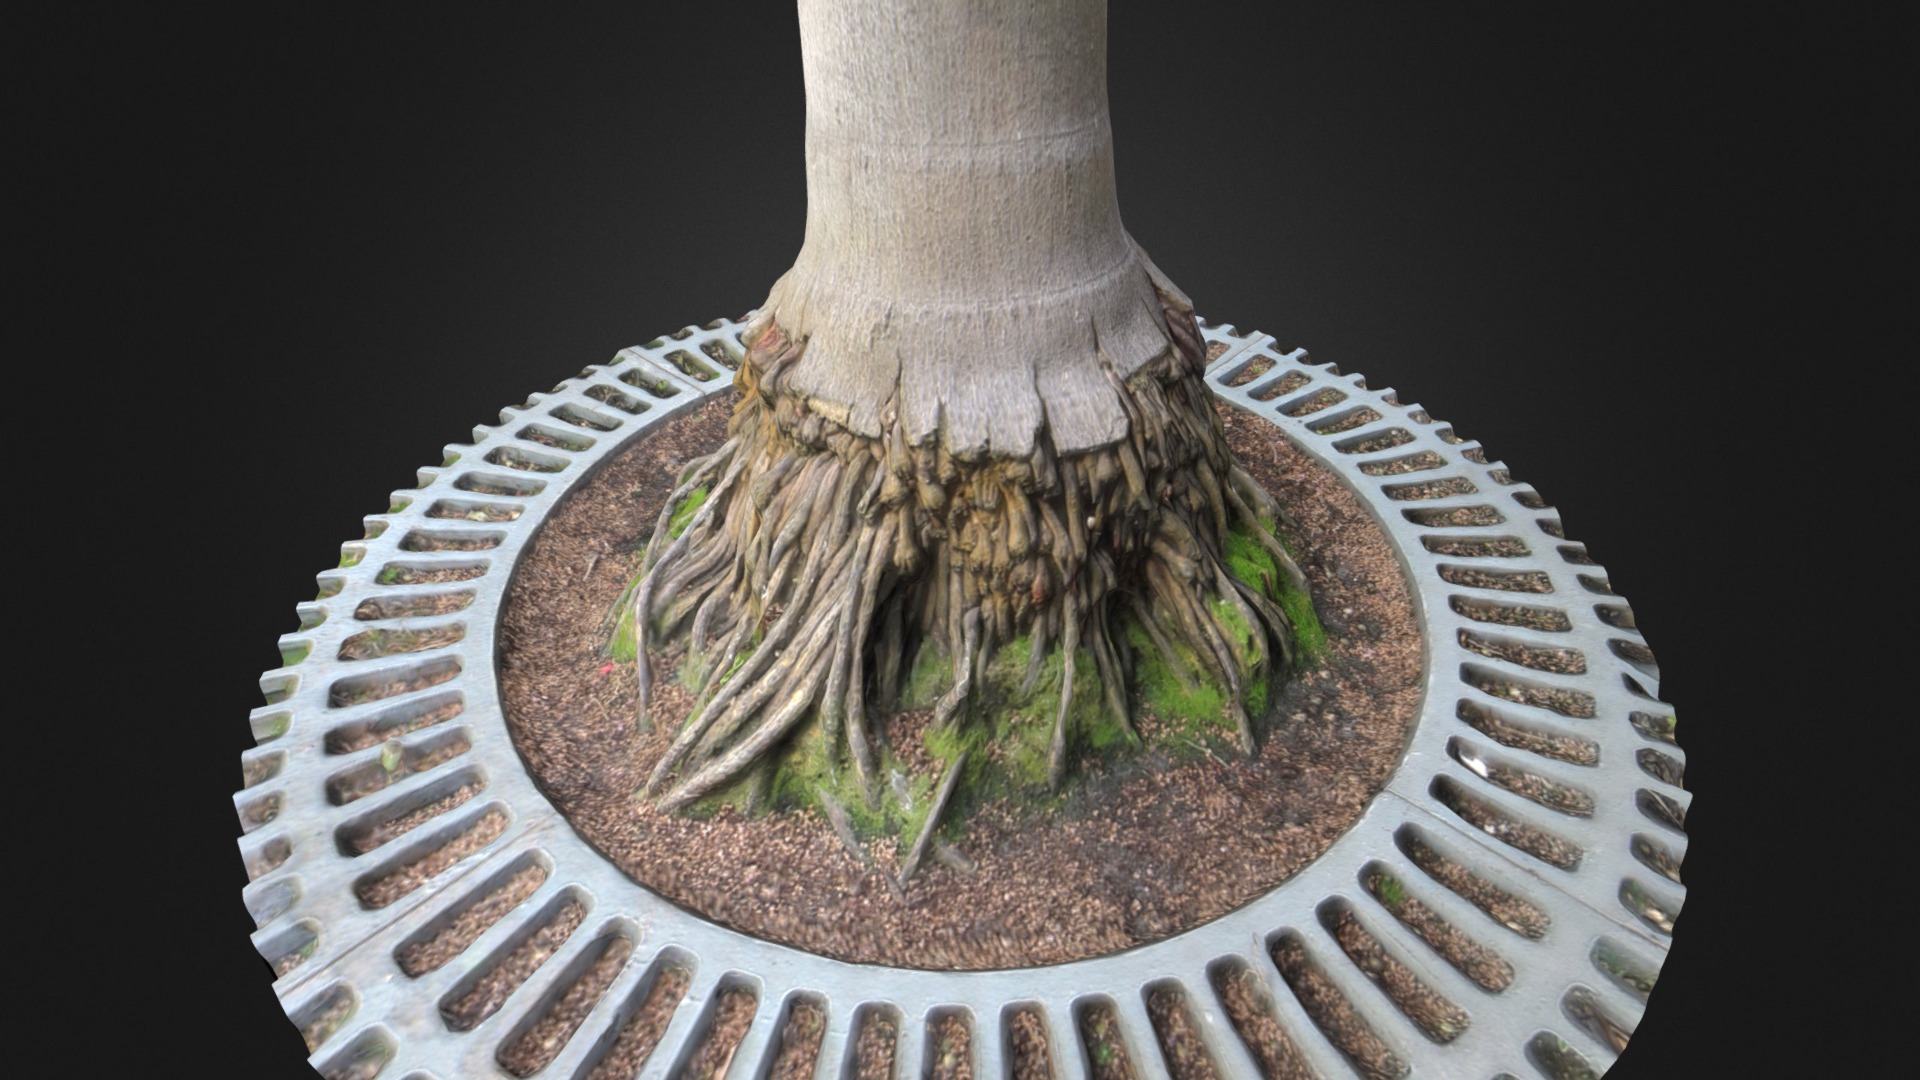 3D model Palm Tree Roots, RBG, Edinburgh - This is a 3D model of the Palm Tree Roots, RBG, Edinburgh. The 3D model is about a tree stump with a hole in it.